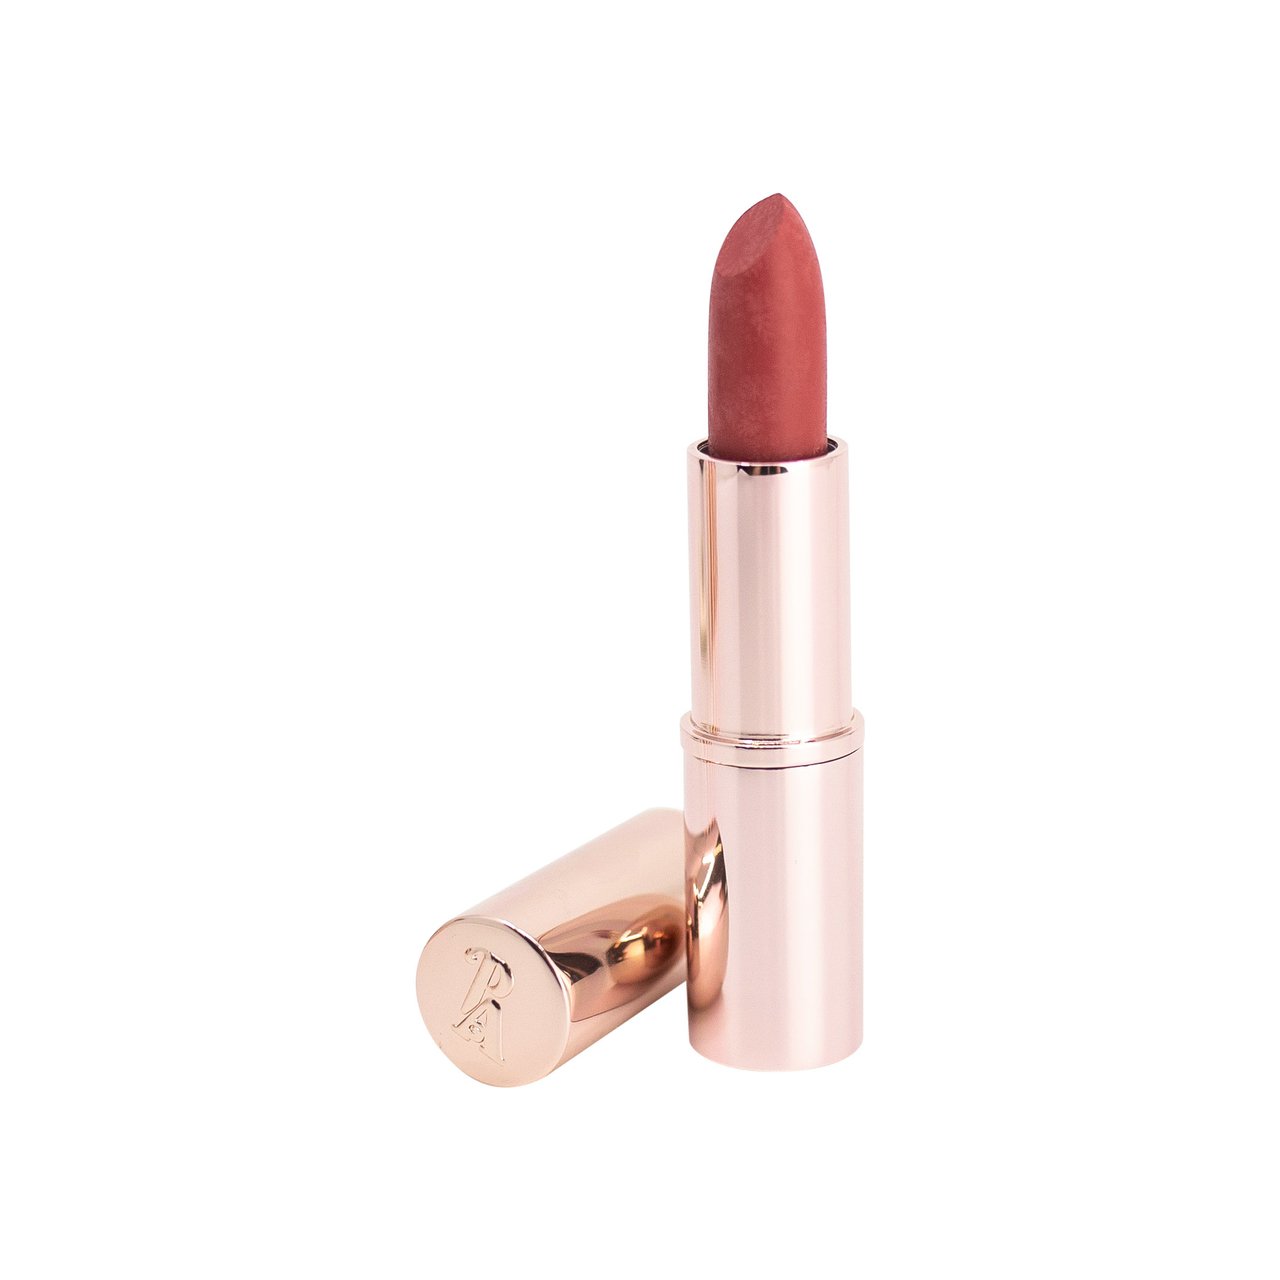 Pure Anada - Lavish Natural Lipstick Matte Shine Prestige Canadian Made Makeup All Things Being Eco Chilliwack